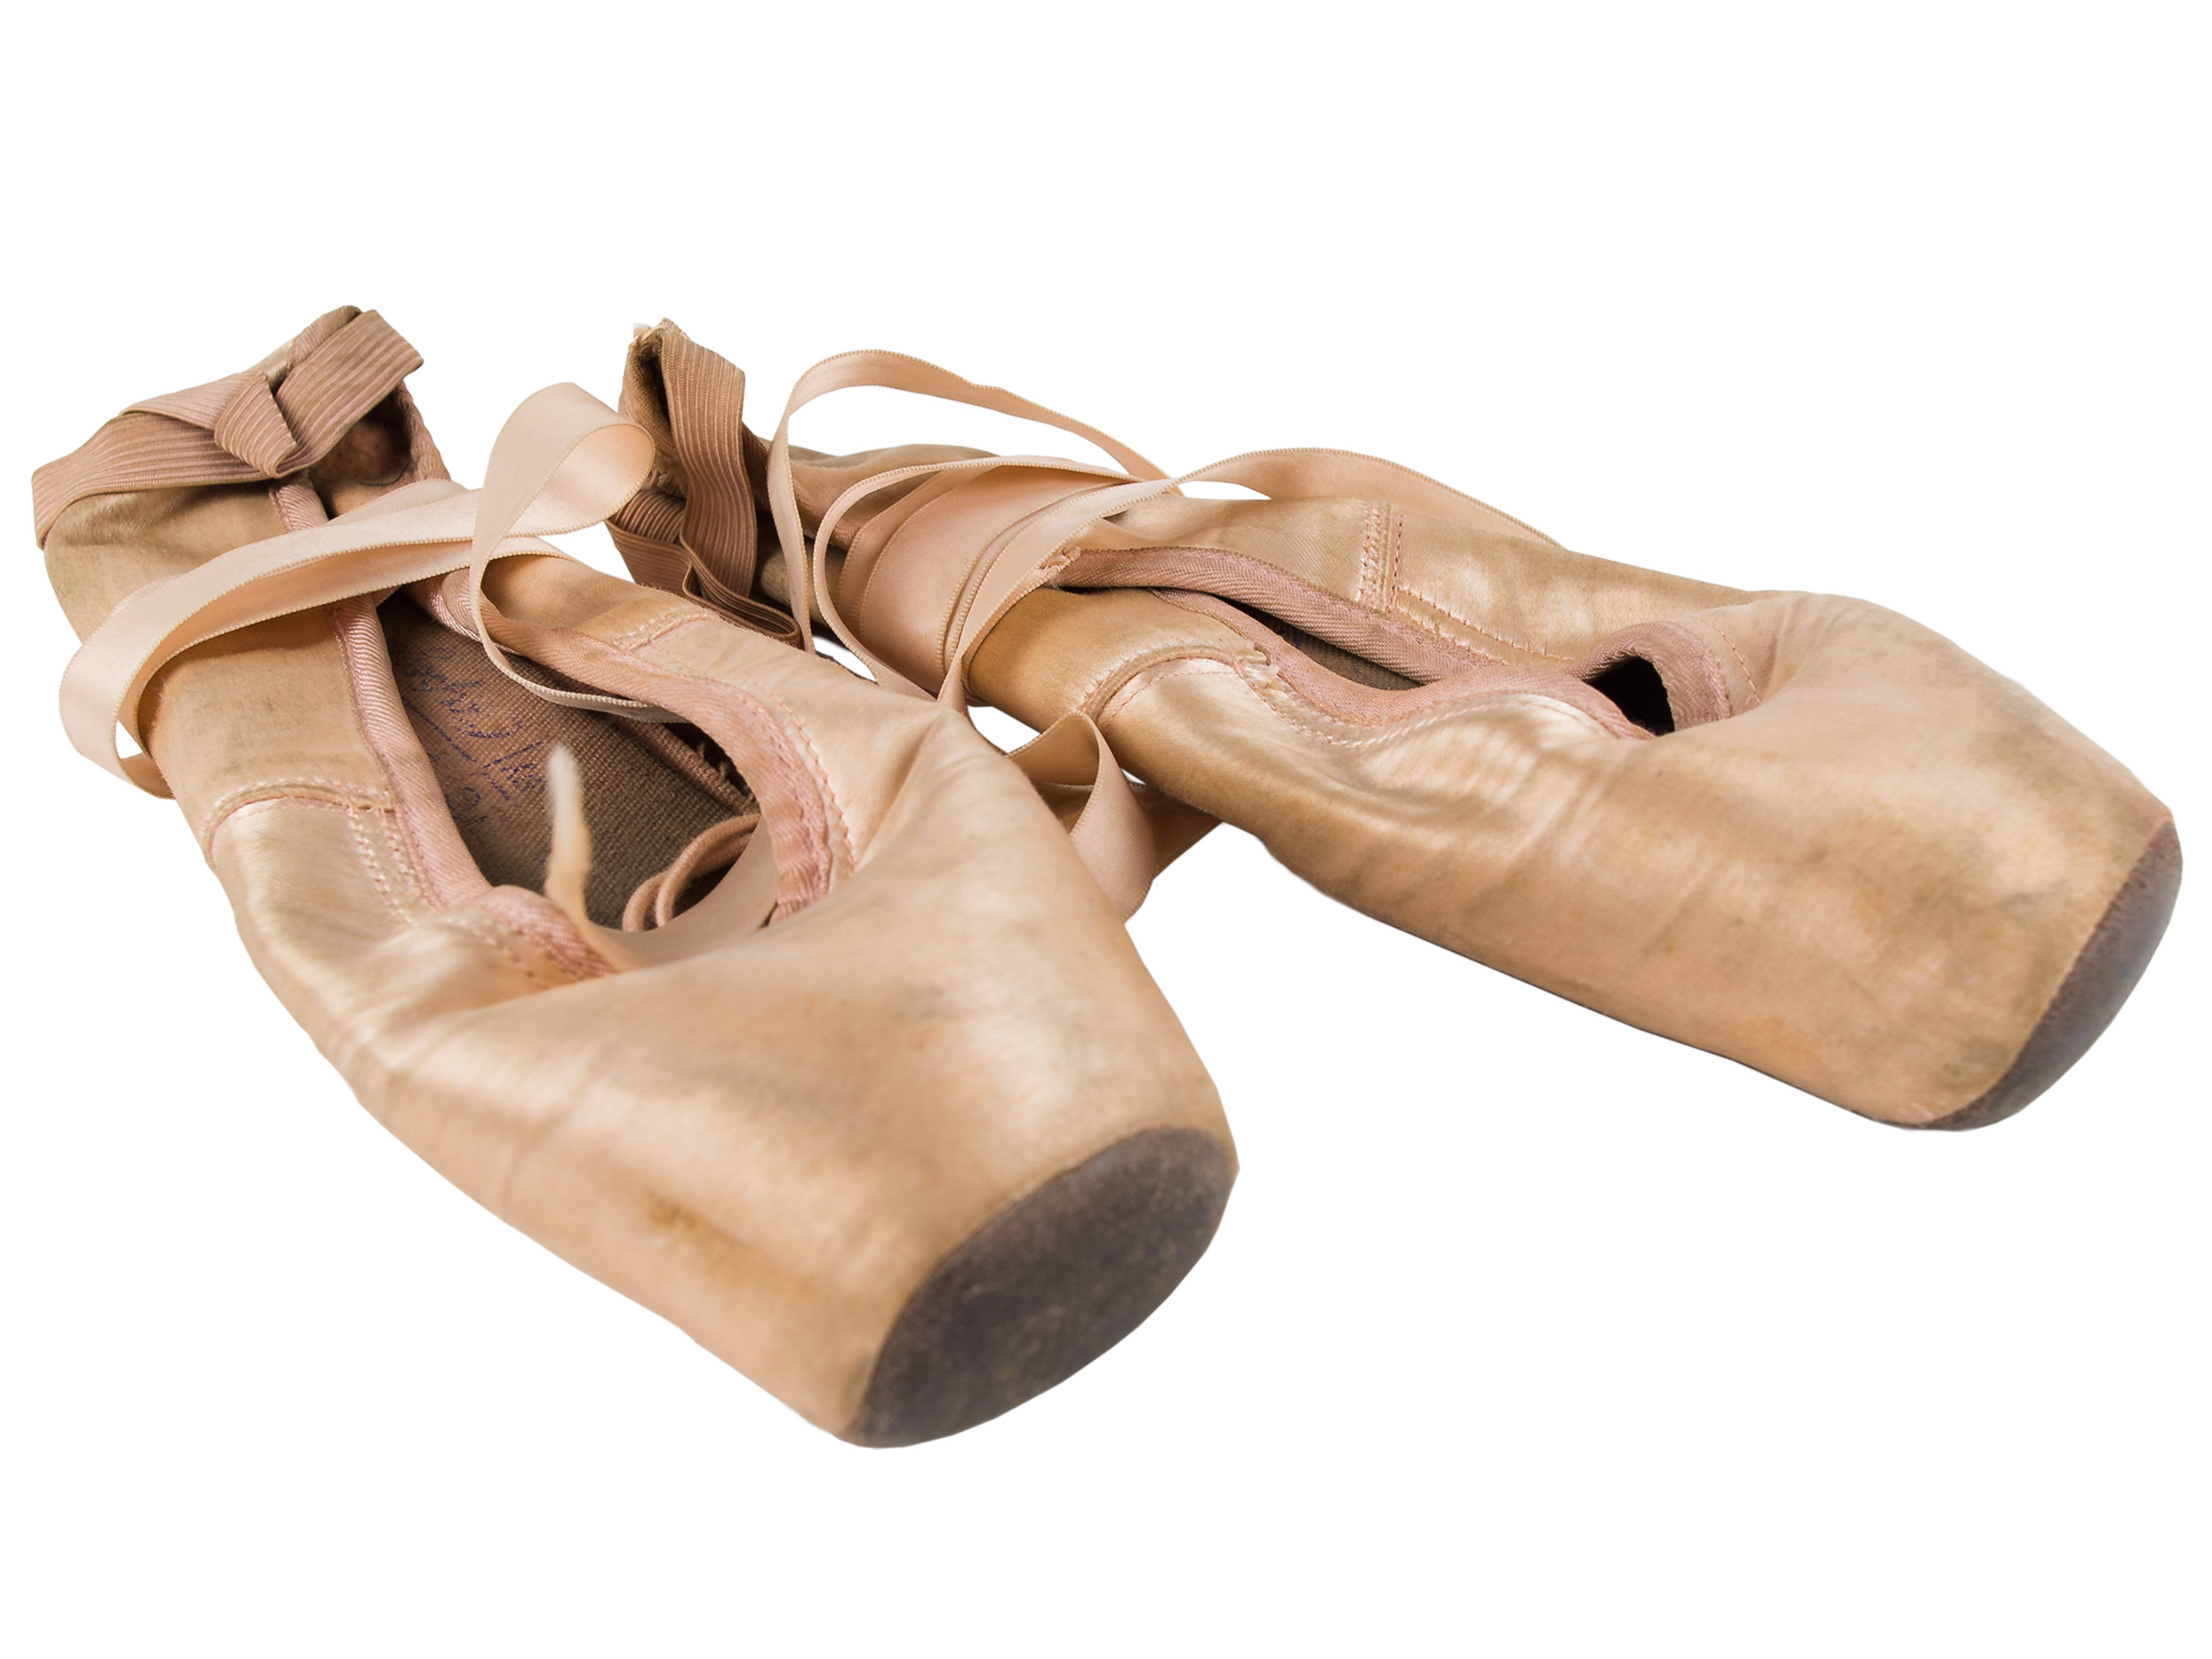 Candida Royalle’s ballet shoes, 1965, and diary, 1971–1974